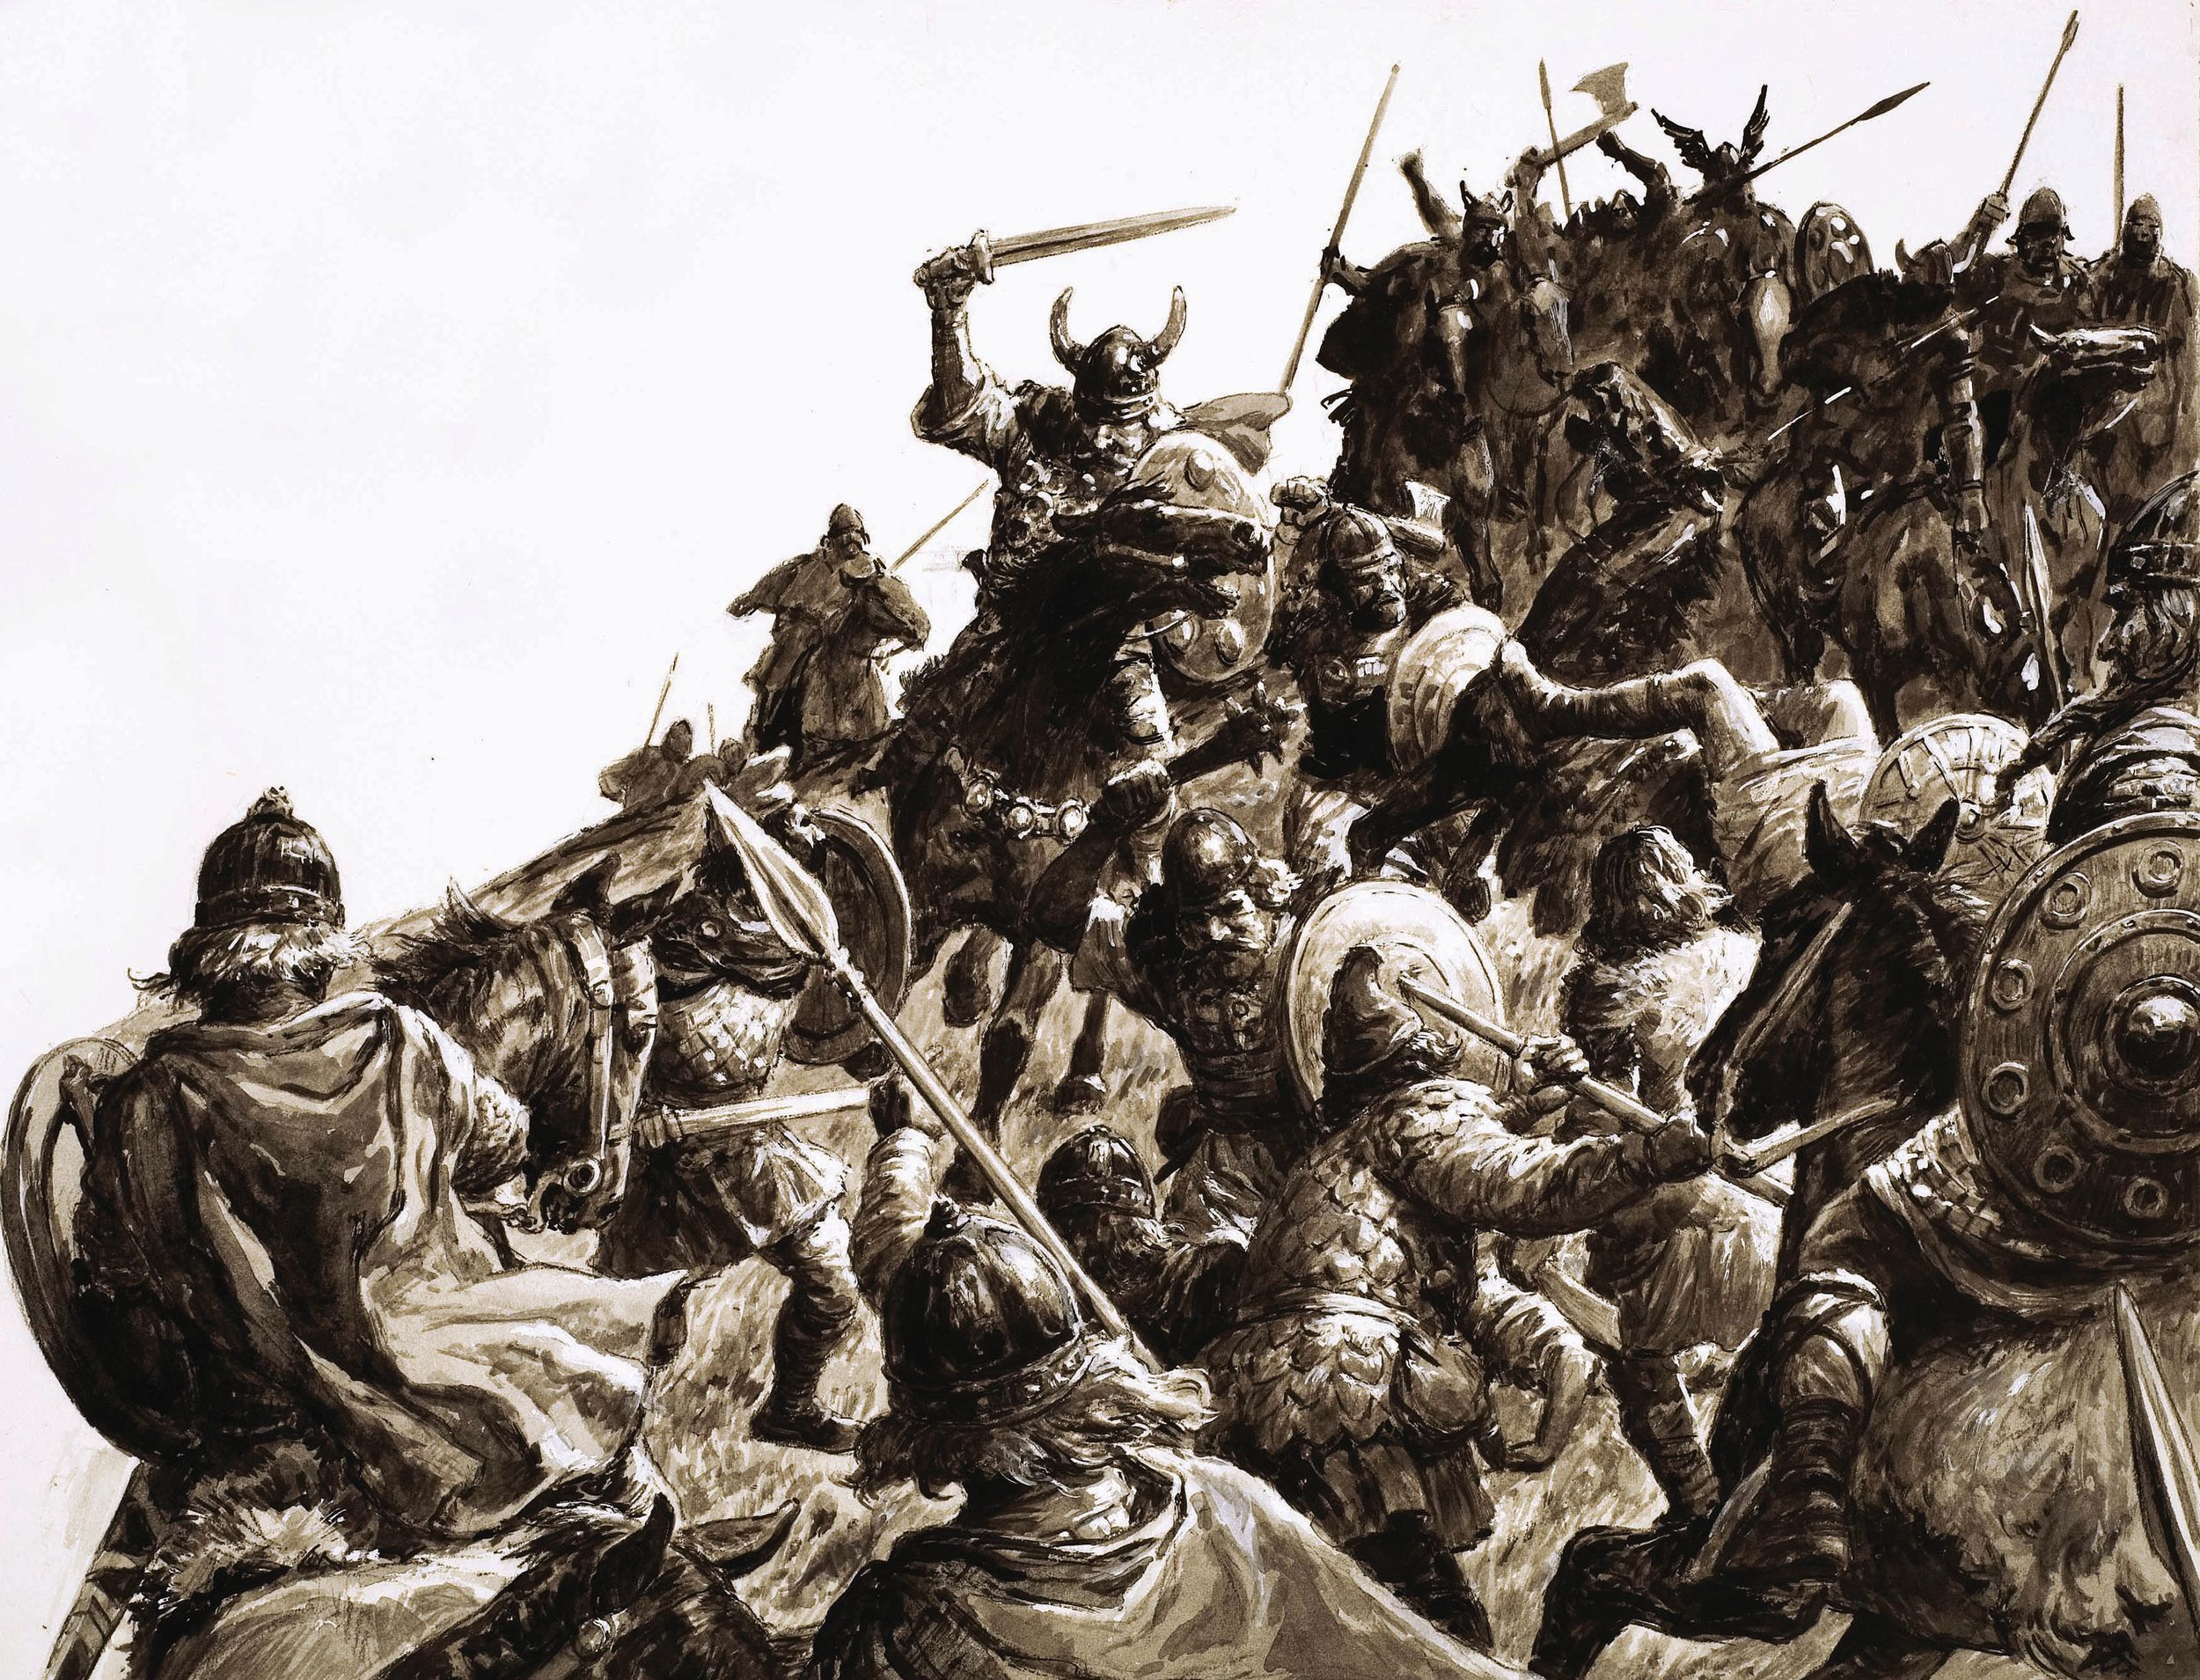 Danish Vikings attack Anglo-Saxon forces under Alfred, King of Wessex, who would unite much of England and establish a lasting peace with the Danes.